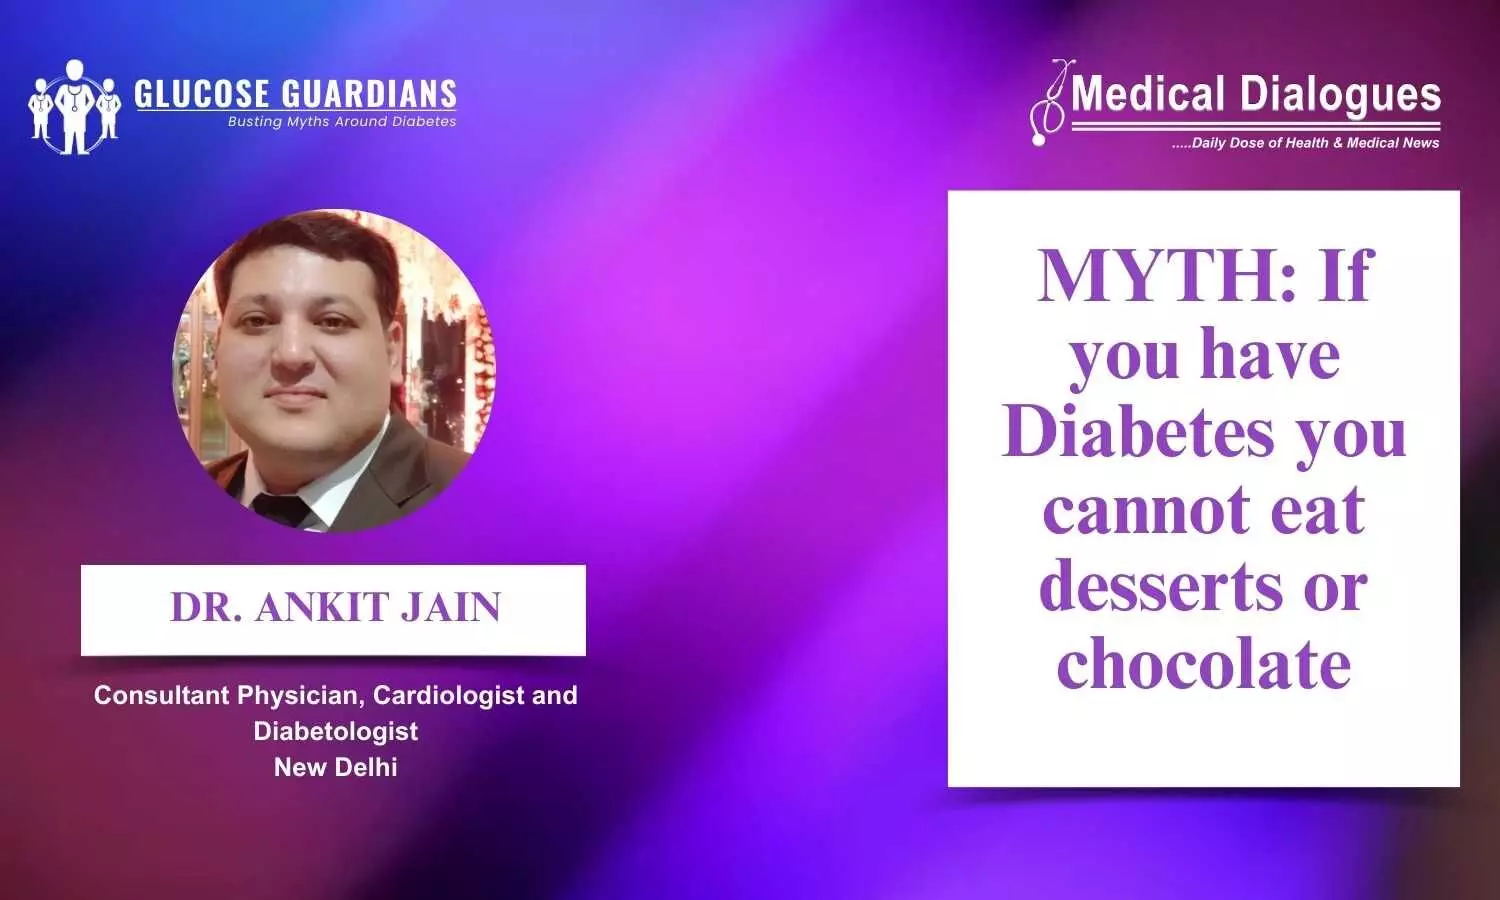 Myths related to eating Desserts in Diabetes - Dr Ankit Jain